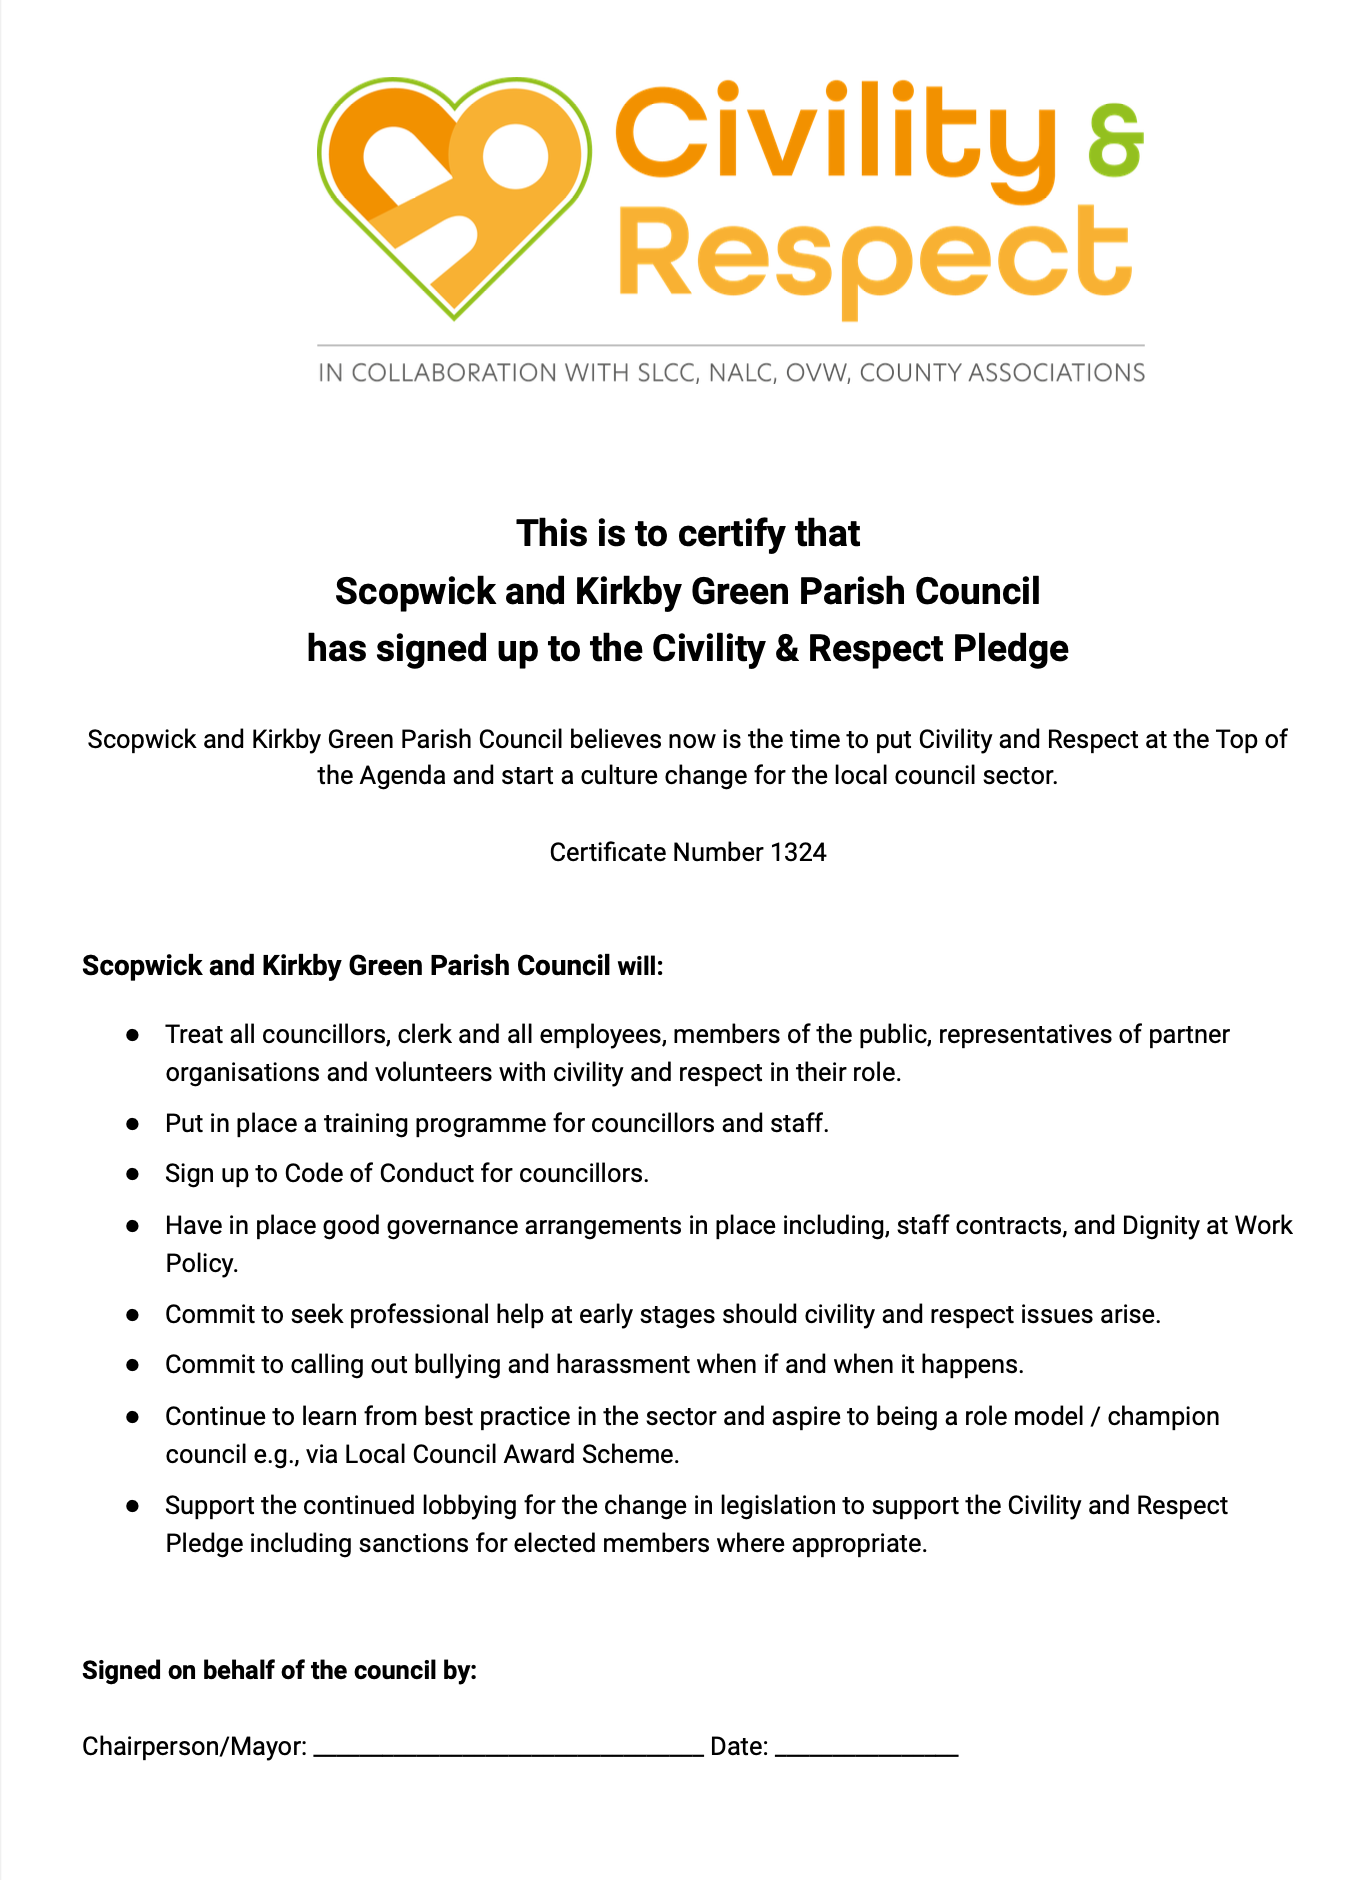 Civility &amp; Respect certificate issues to Scopwick &amp; Kirkby Green Parish Council